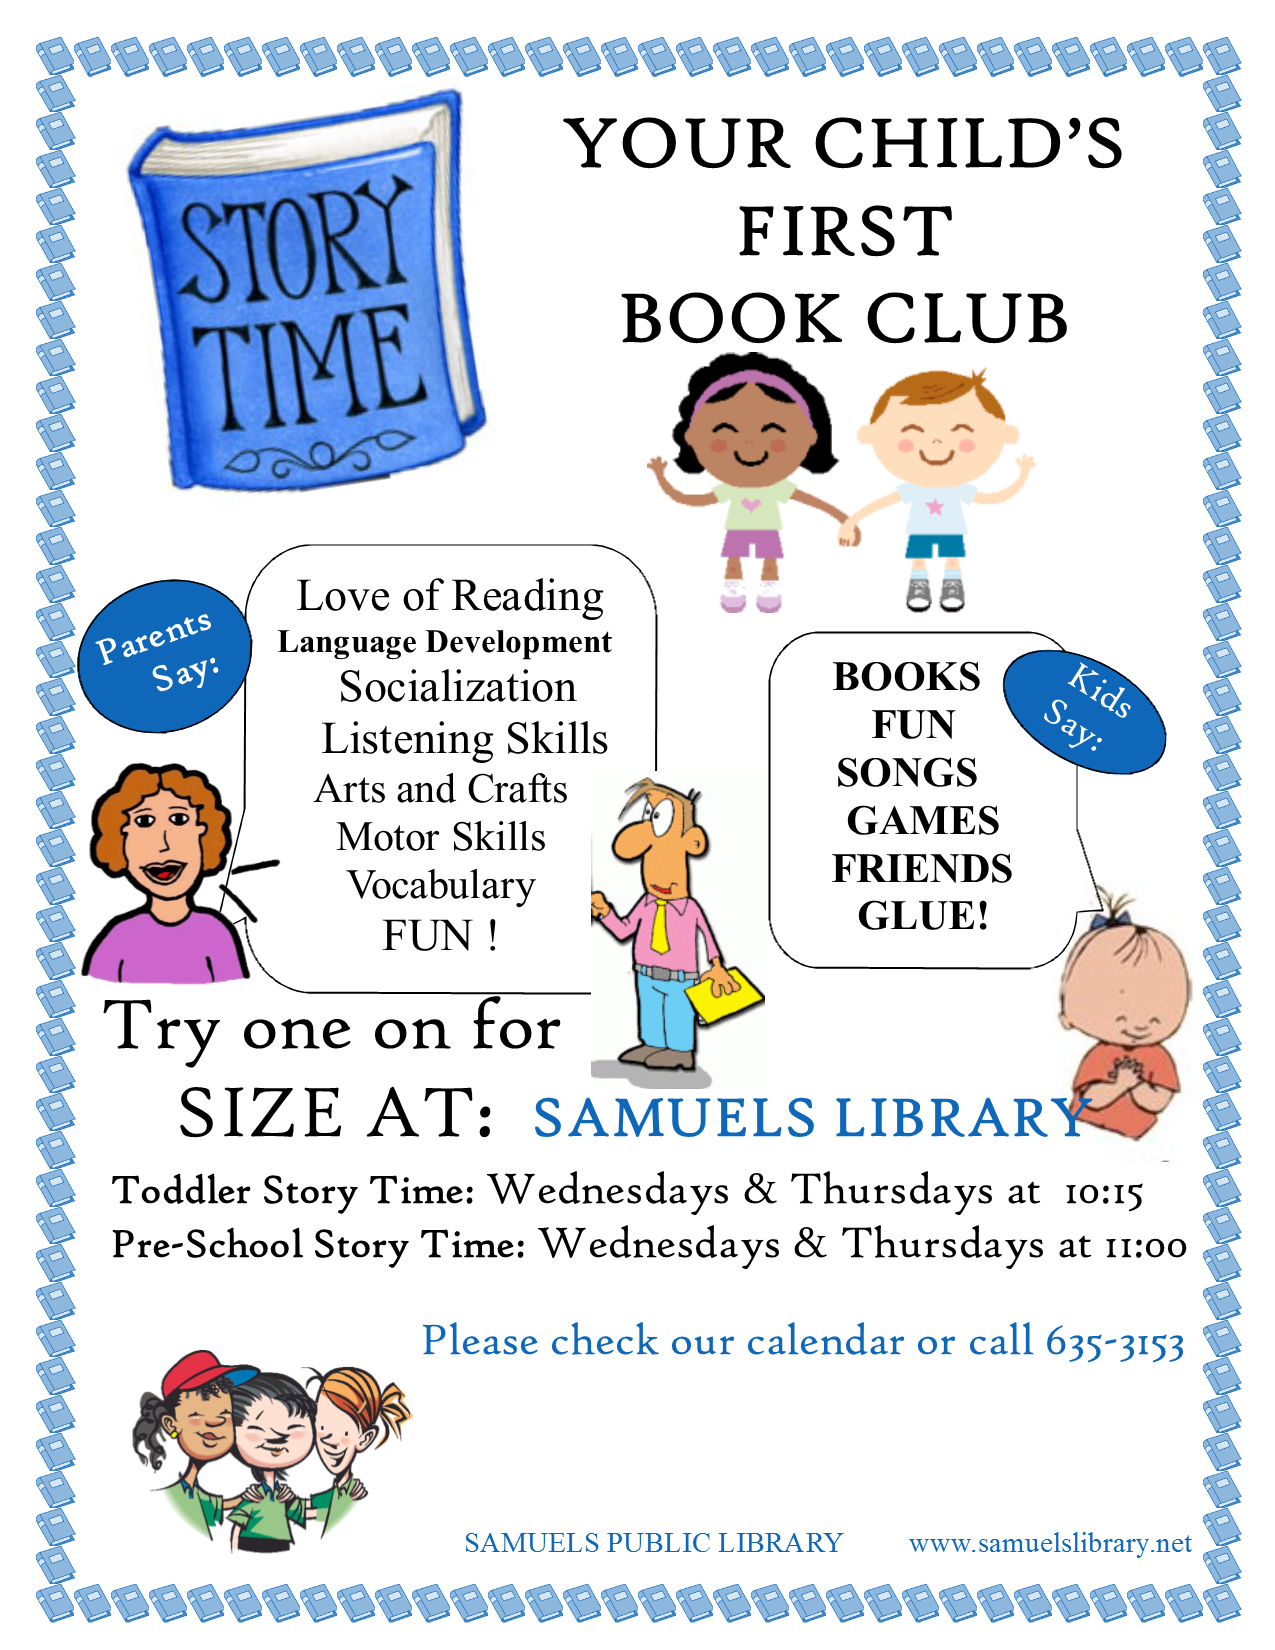 Preschool Story time meets at 11:00 A.M. on Wednesdays and Thursdays.